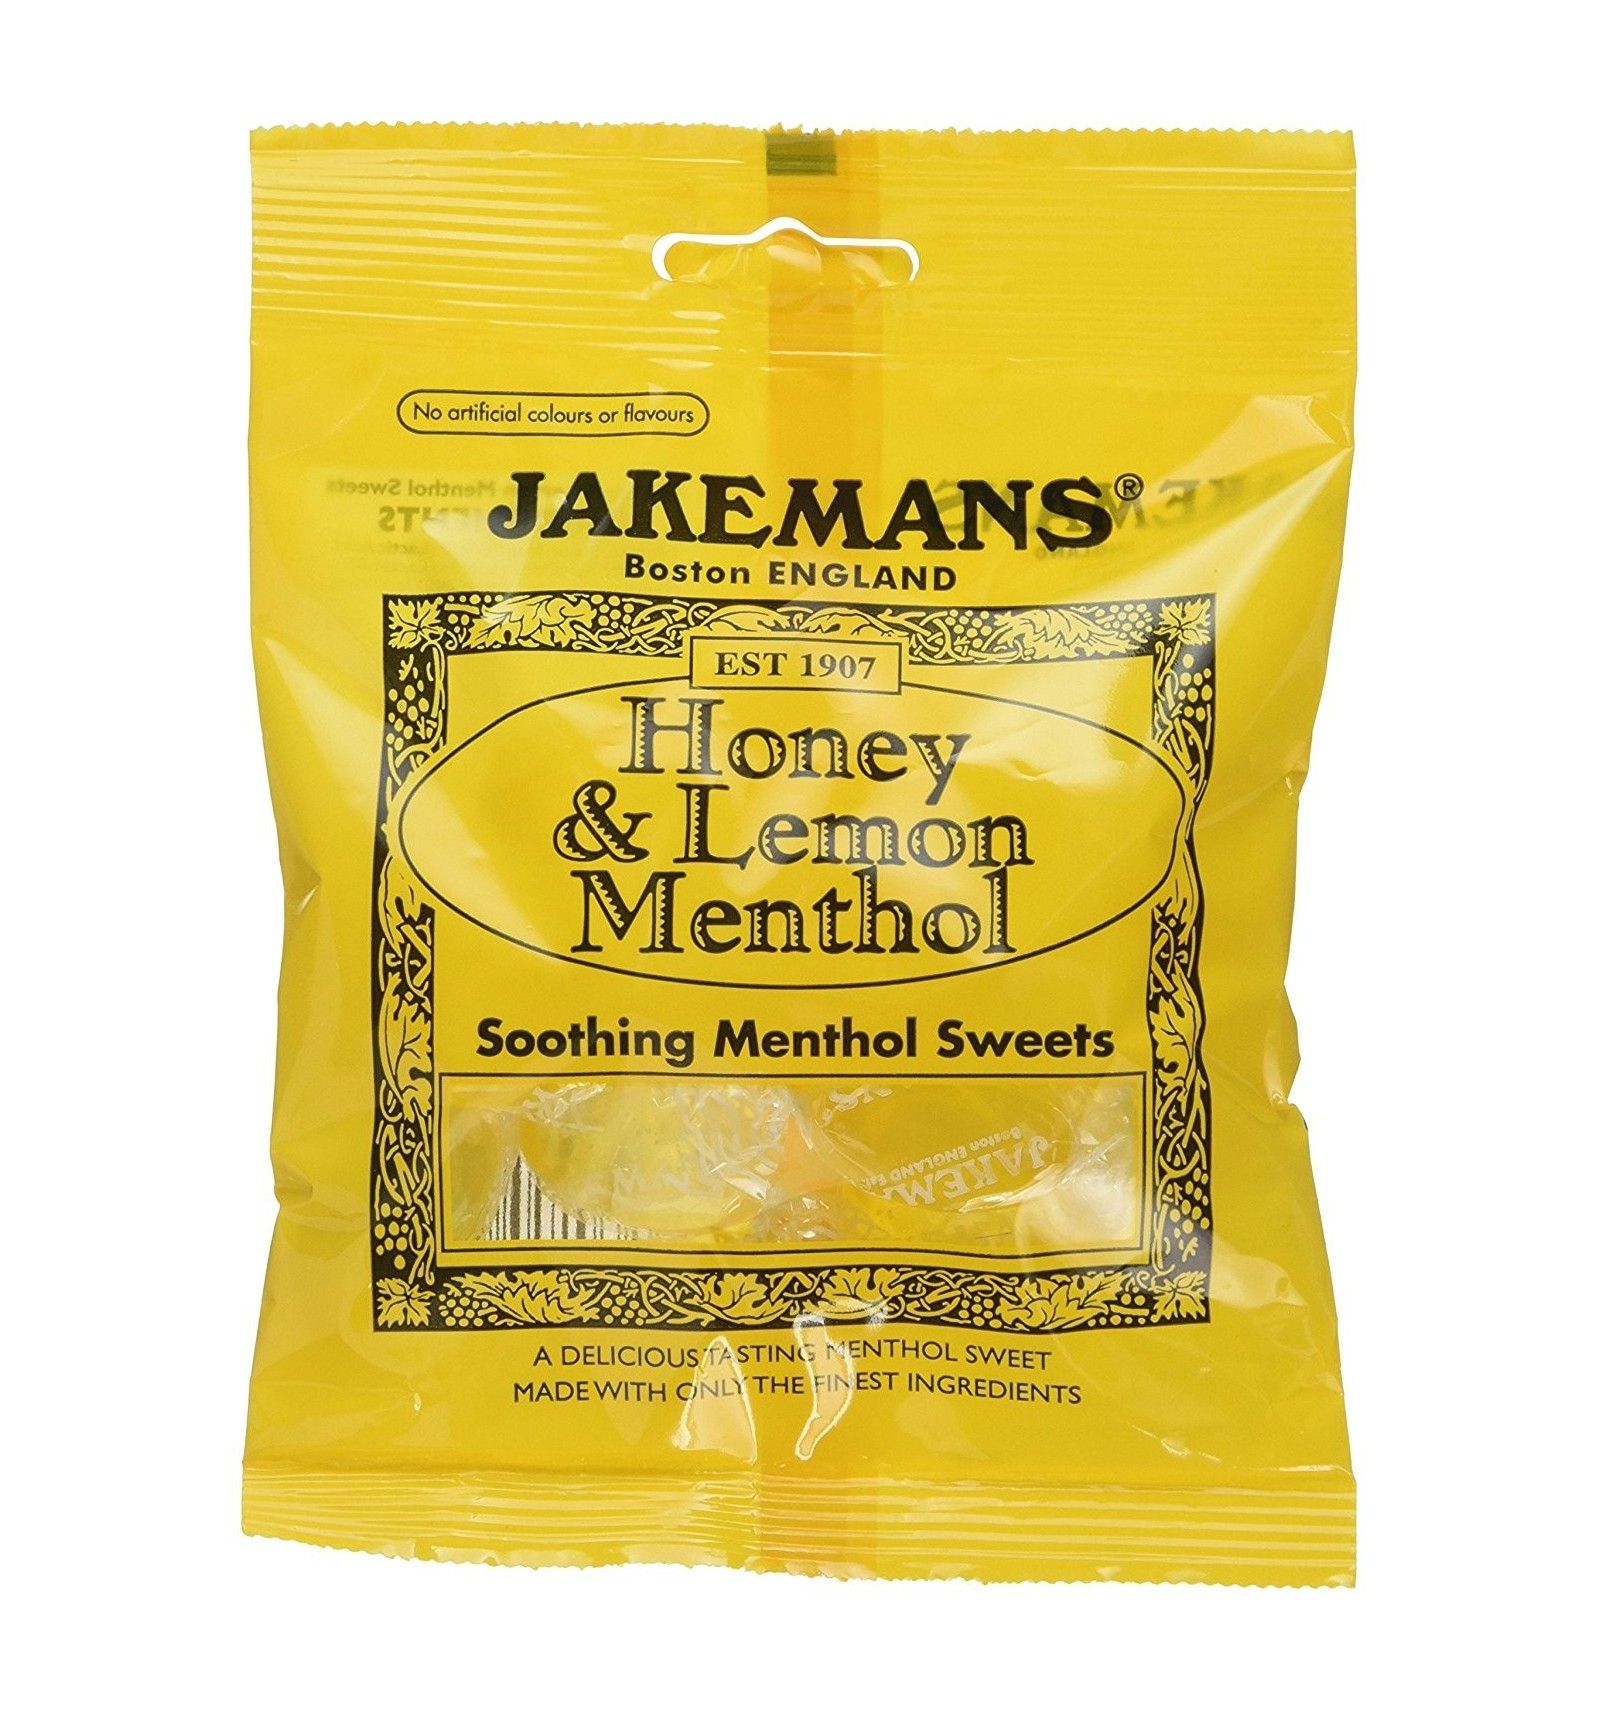 Jakemans Soothing Menthol Sweets Honey and Lemon Flavour ( Pack of 3 )